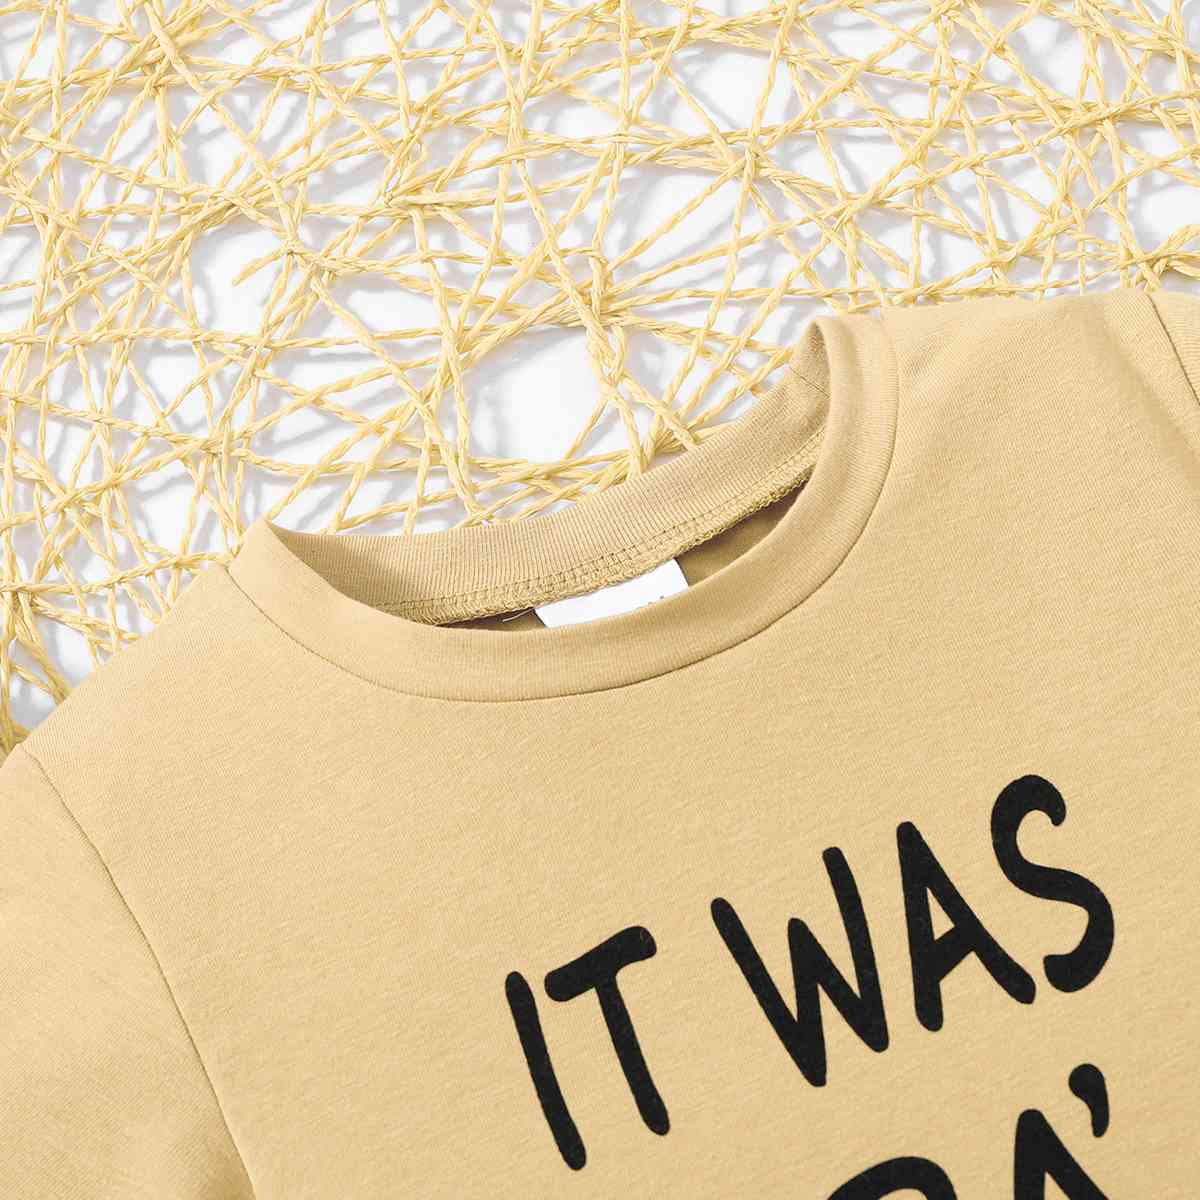 Kids IT WAS PAPA'S IDEA Graphic Tee and Shorts Set